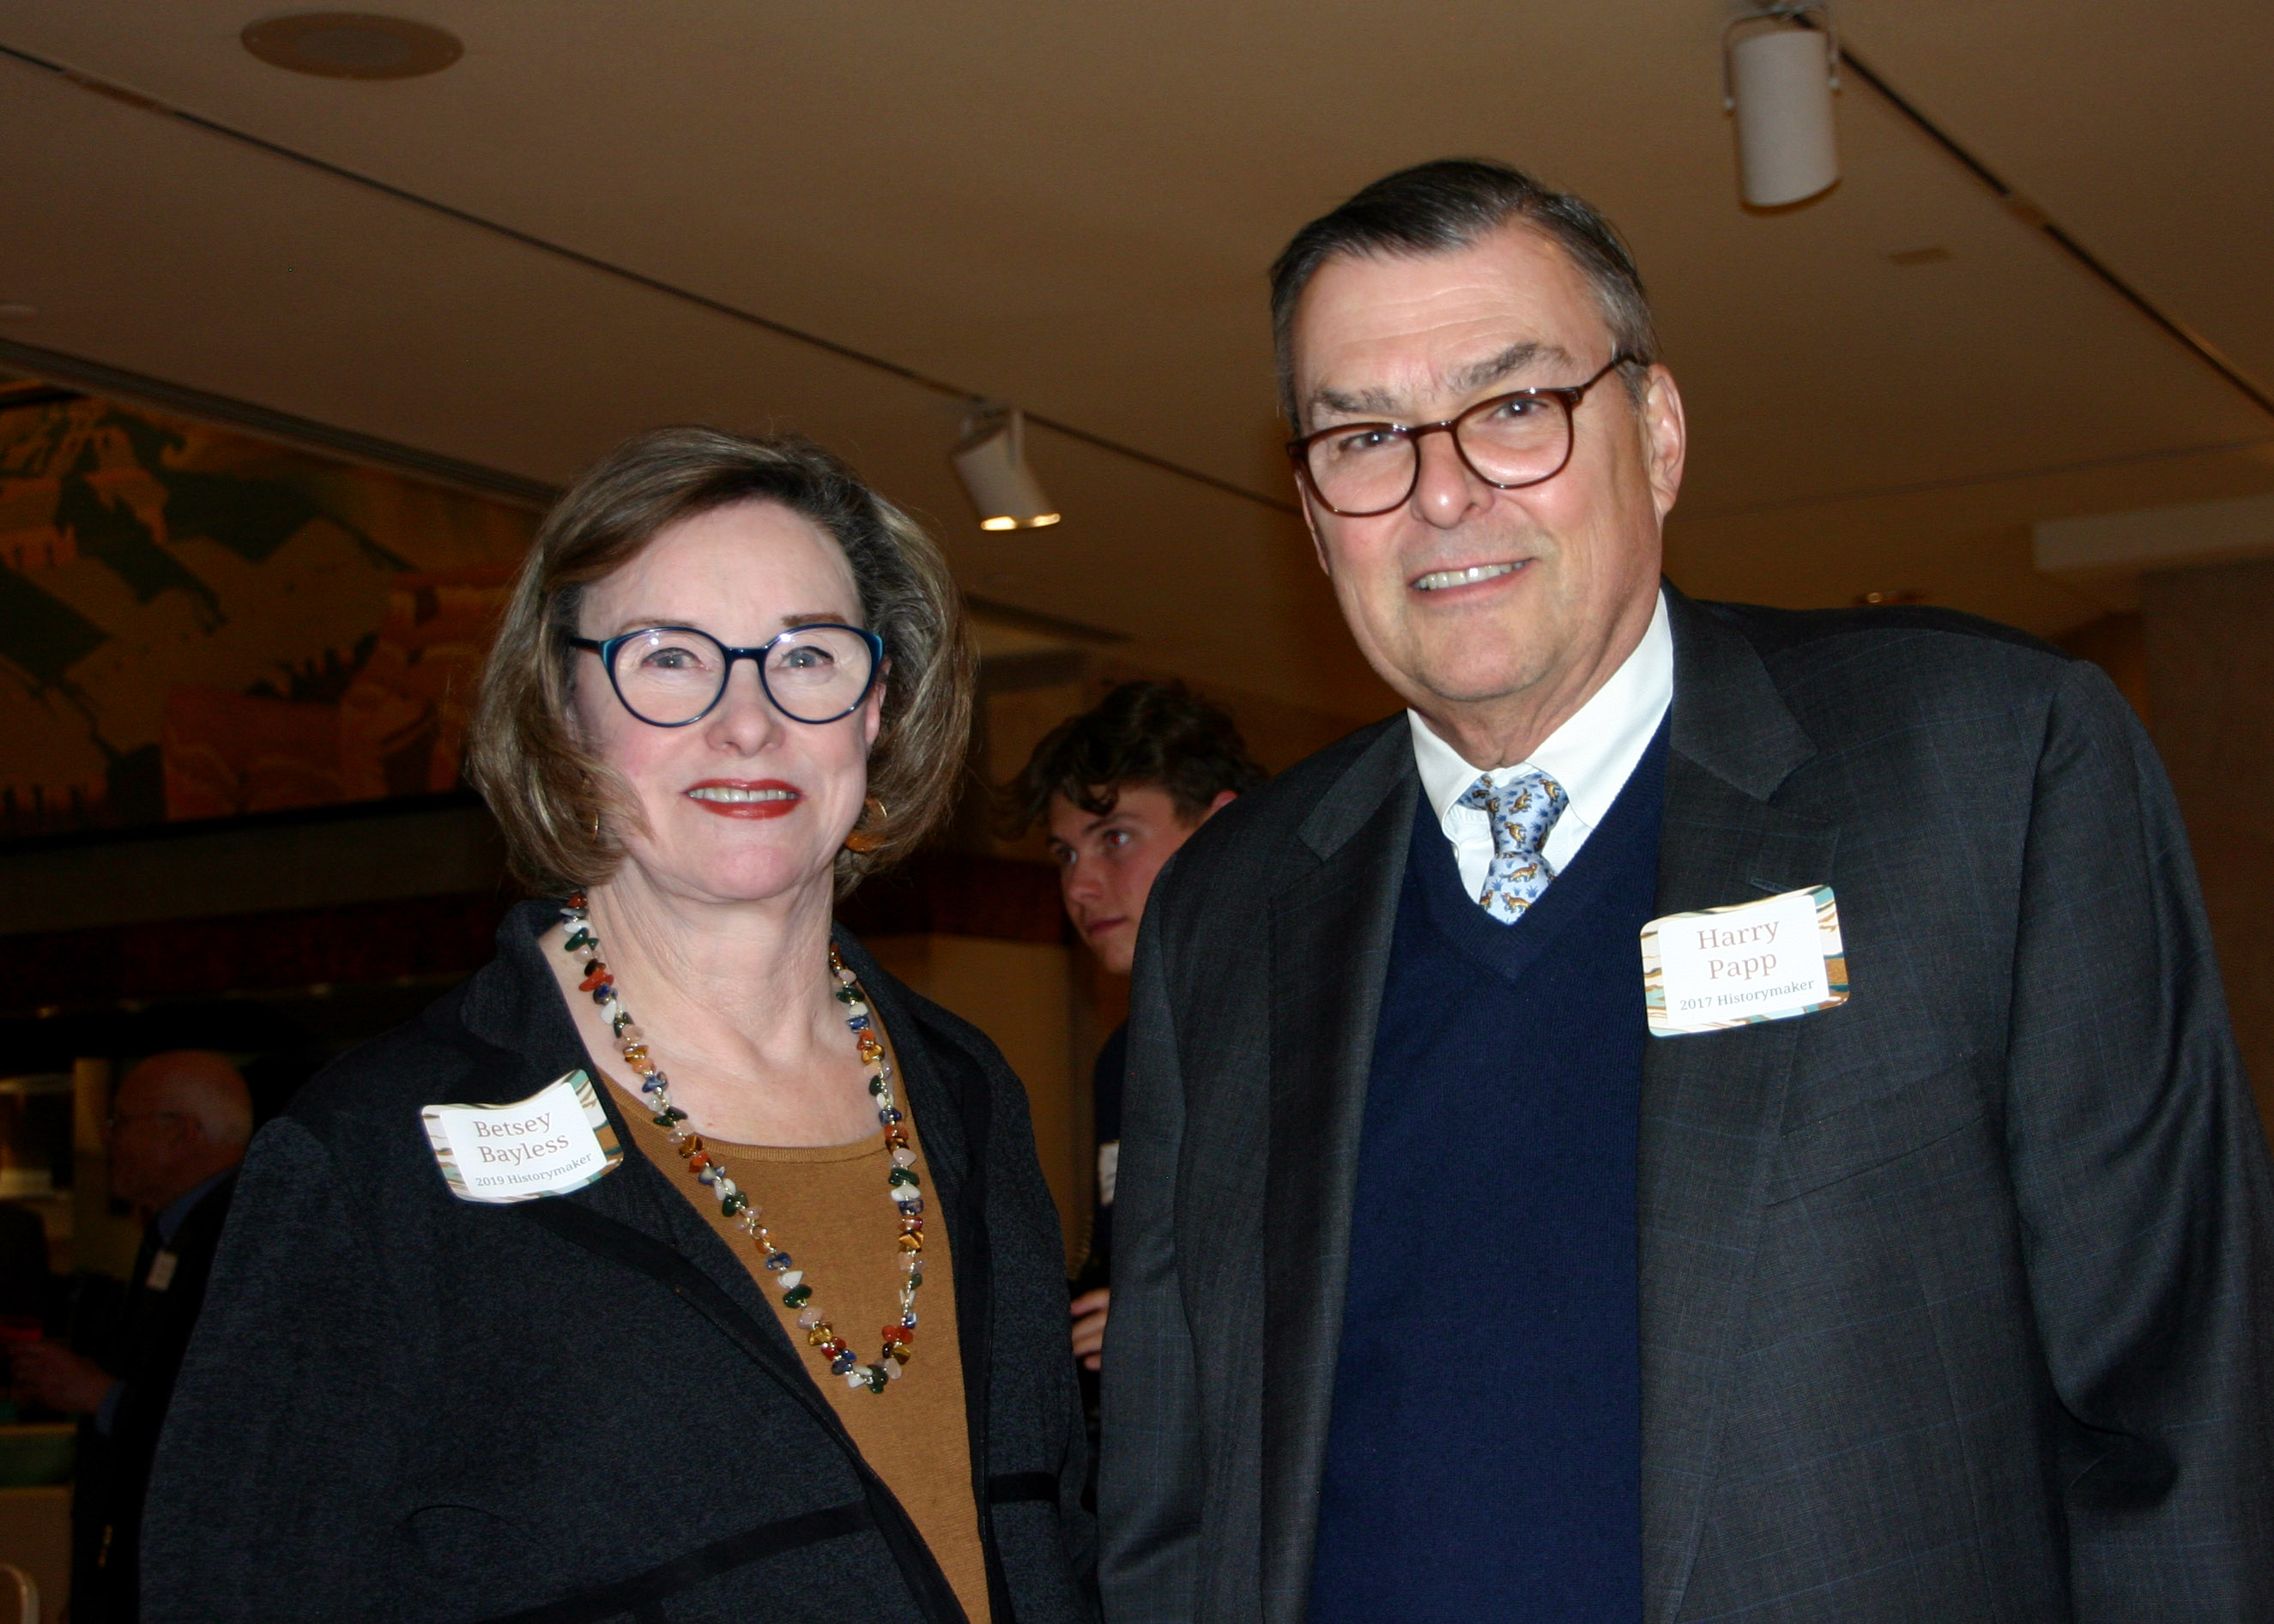 Historymakers Betsy Bayless & Harry Papp